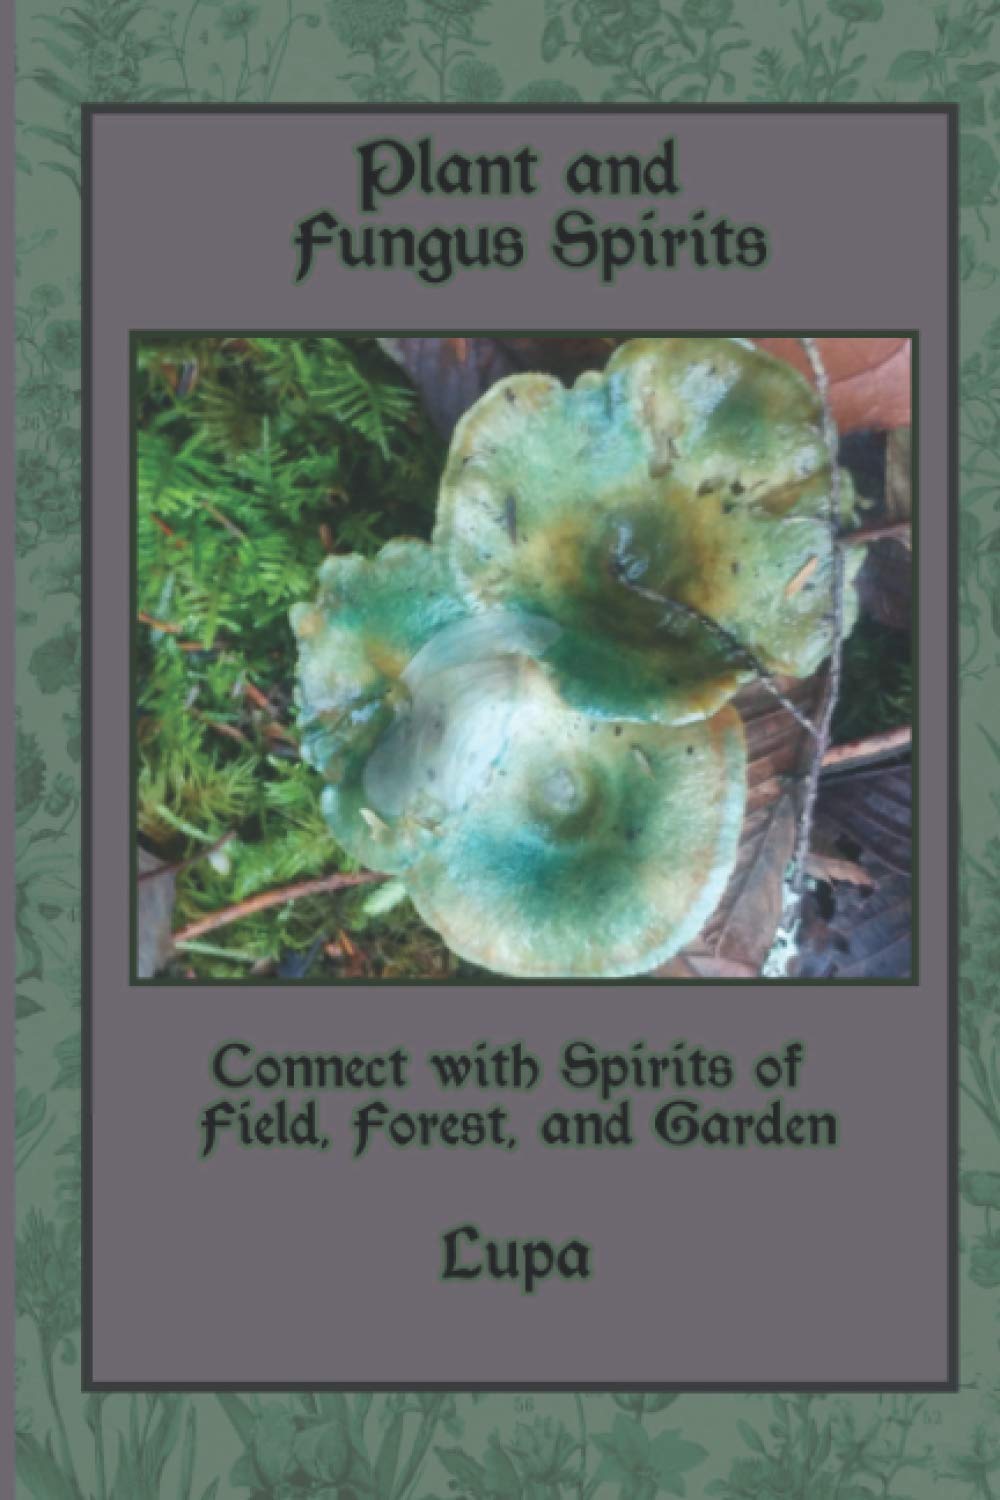 Plant and Fungus Spirits: Connect With Spirits of Field, Forest and Garden by Lupa